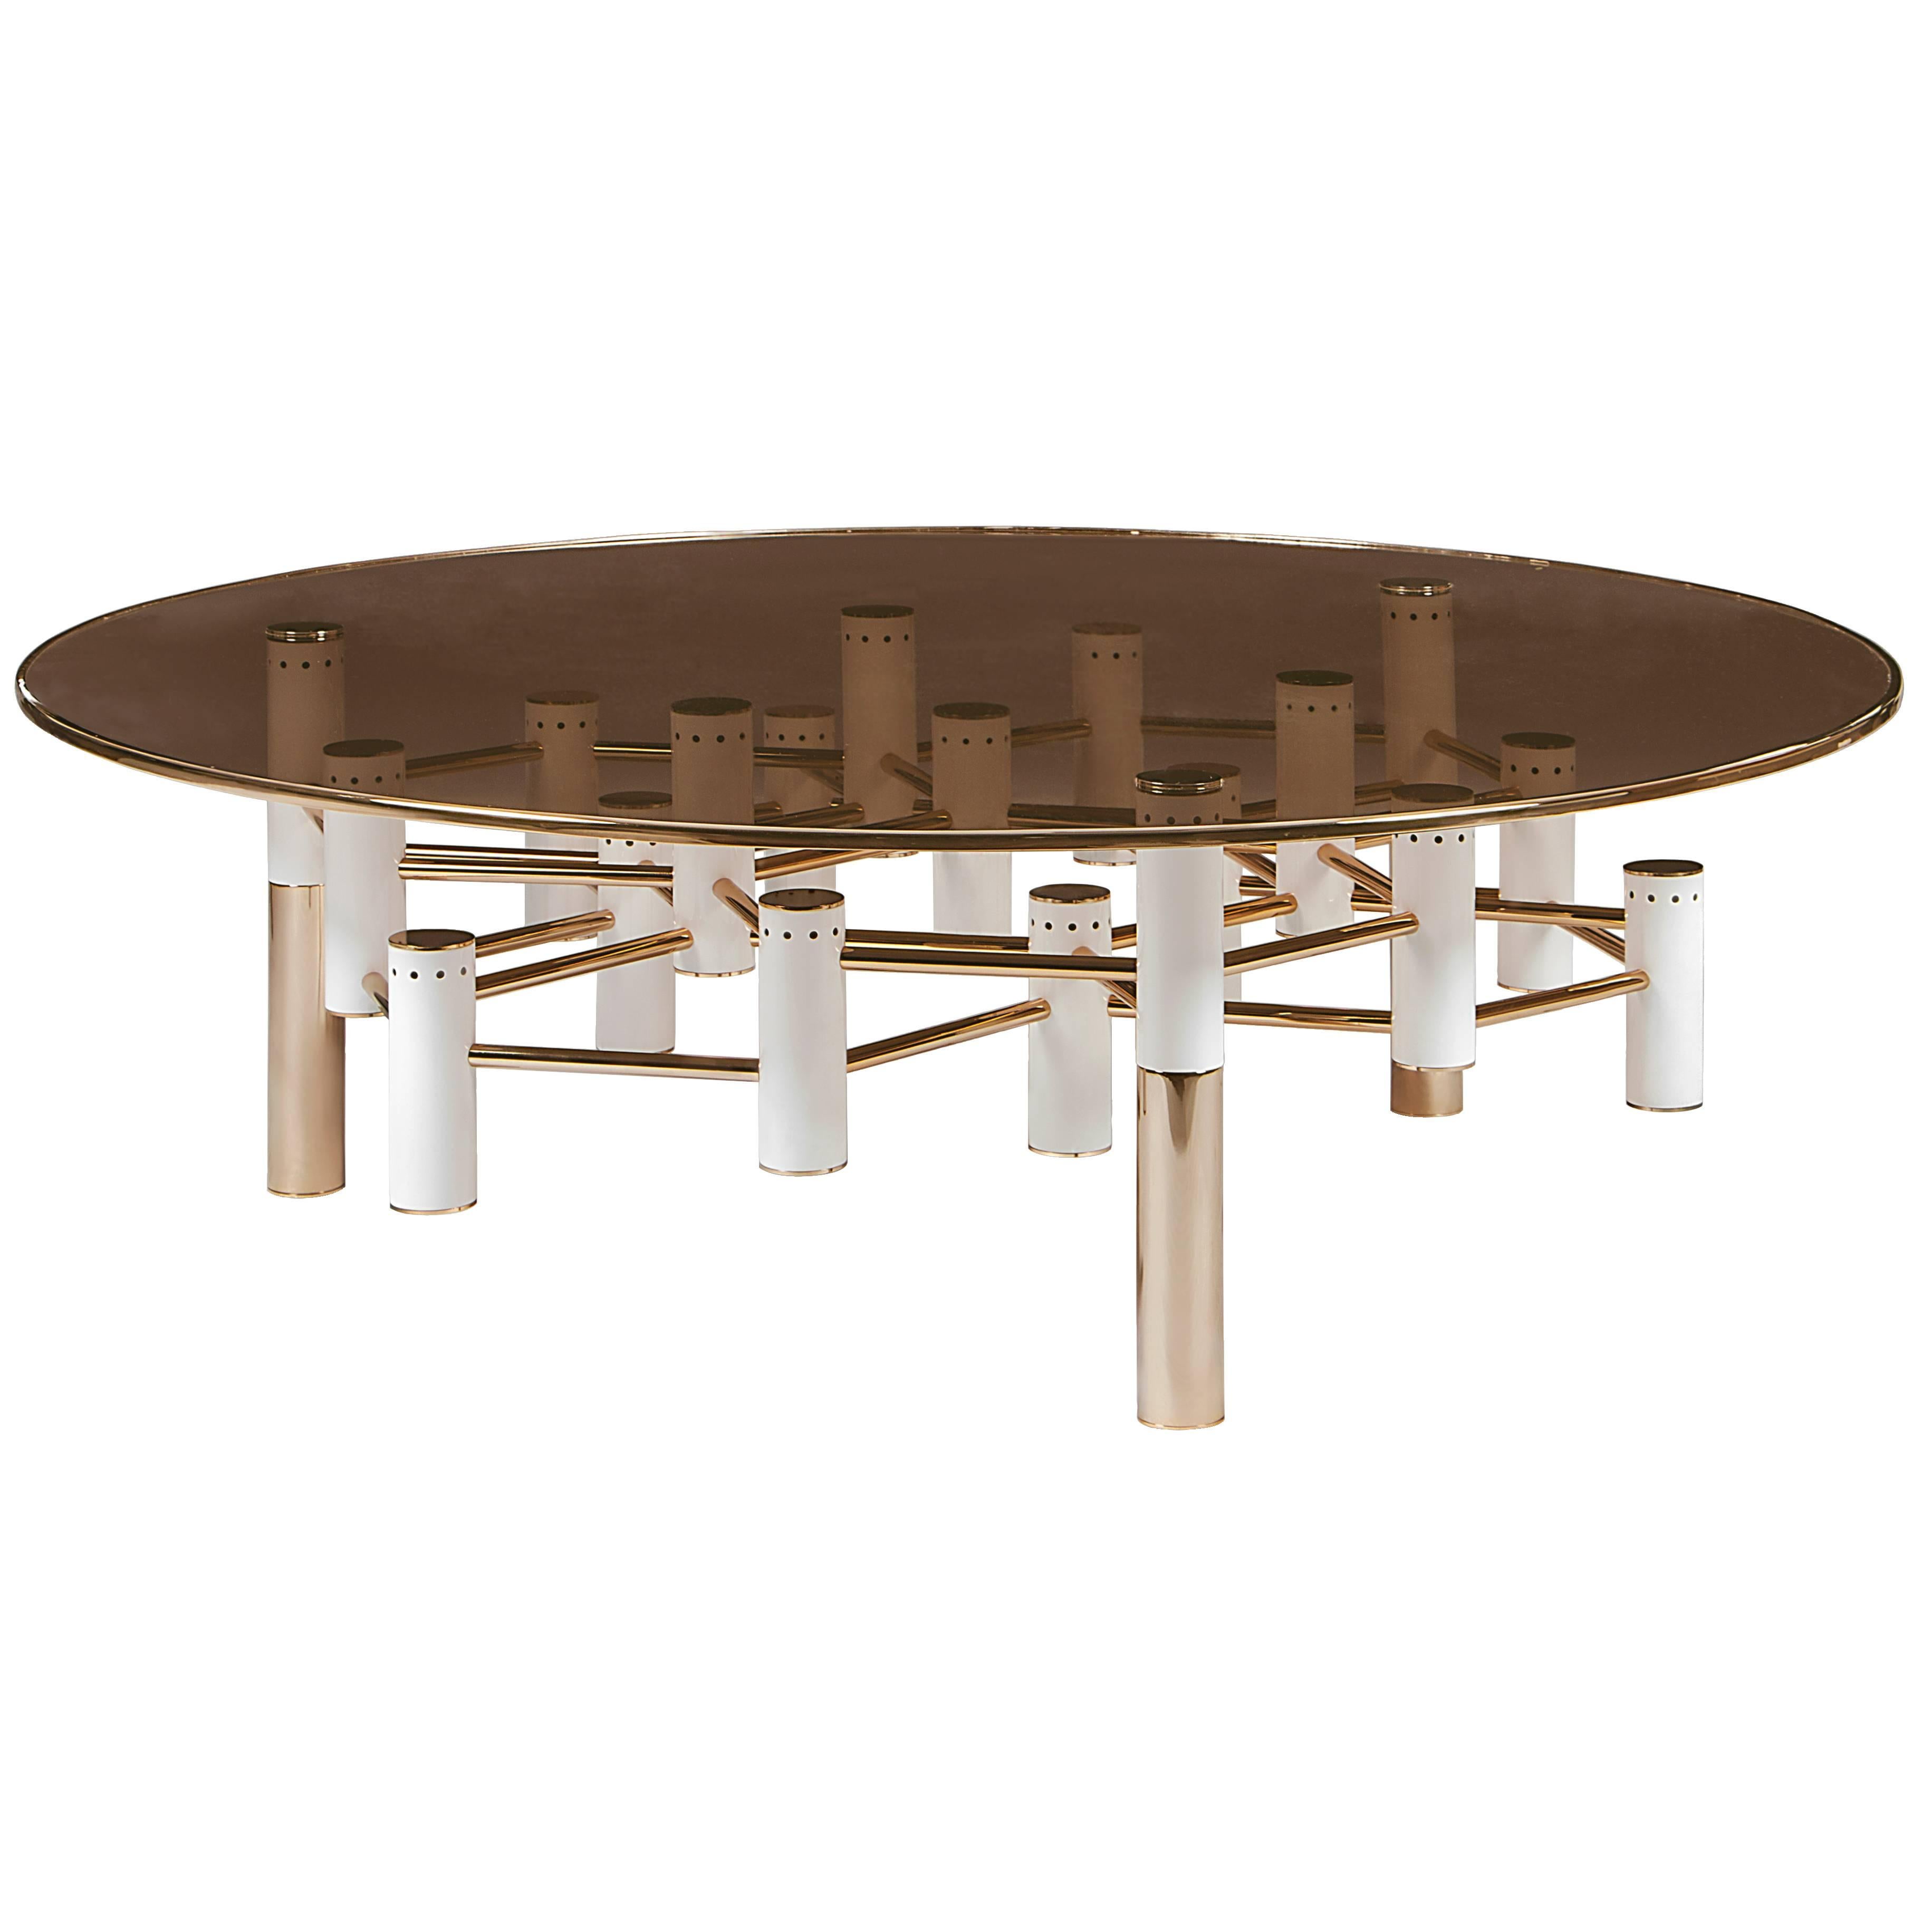 European Mid-Century Modern style Round Copper and Glass Coffee, Cocktail Table For Sale